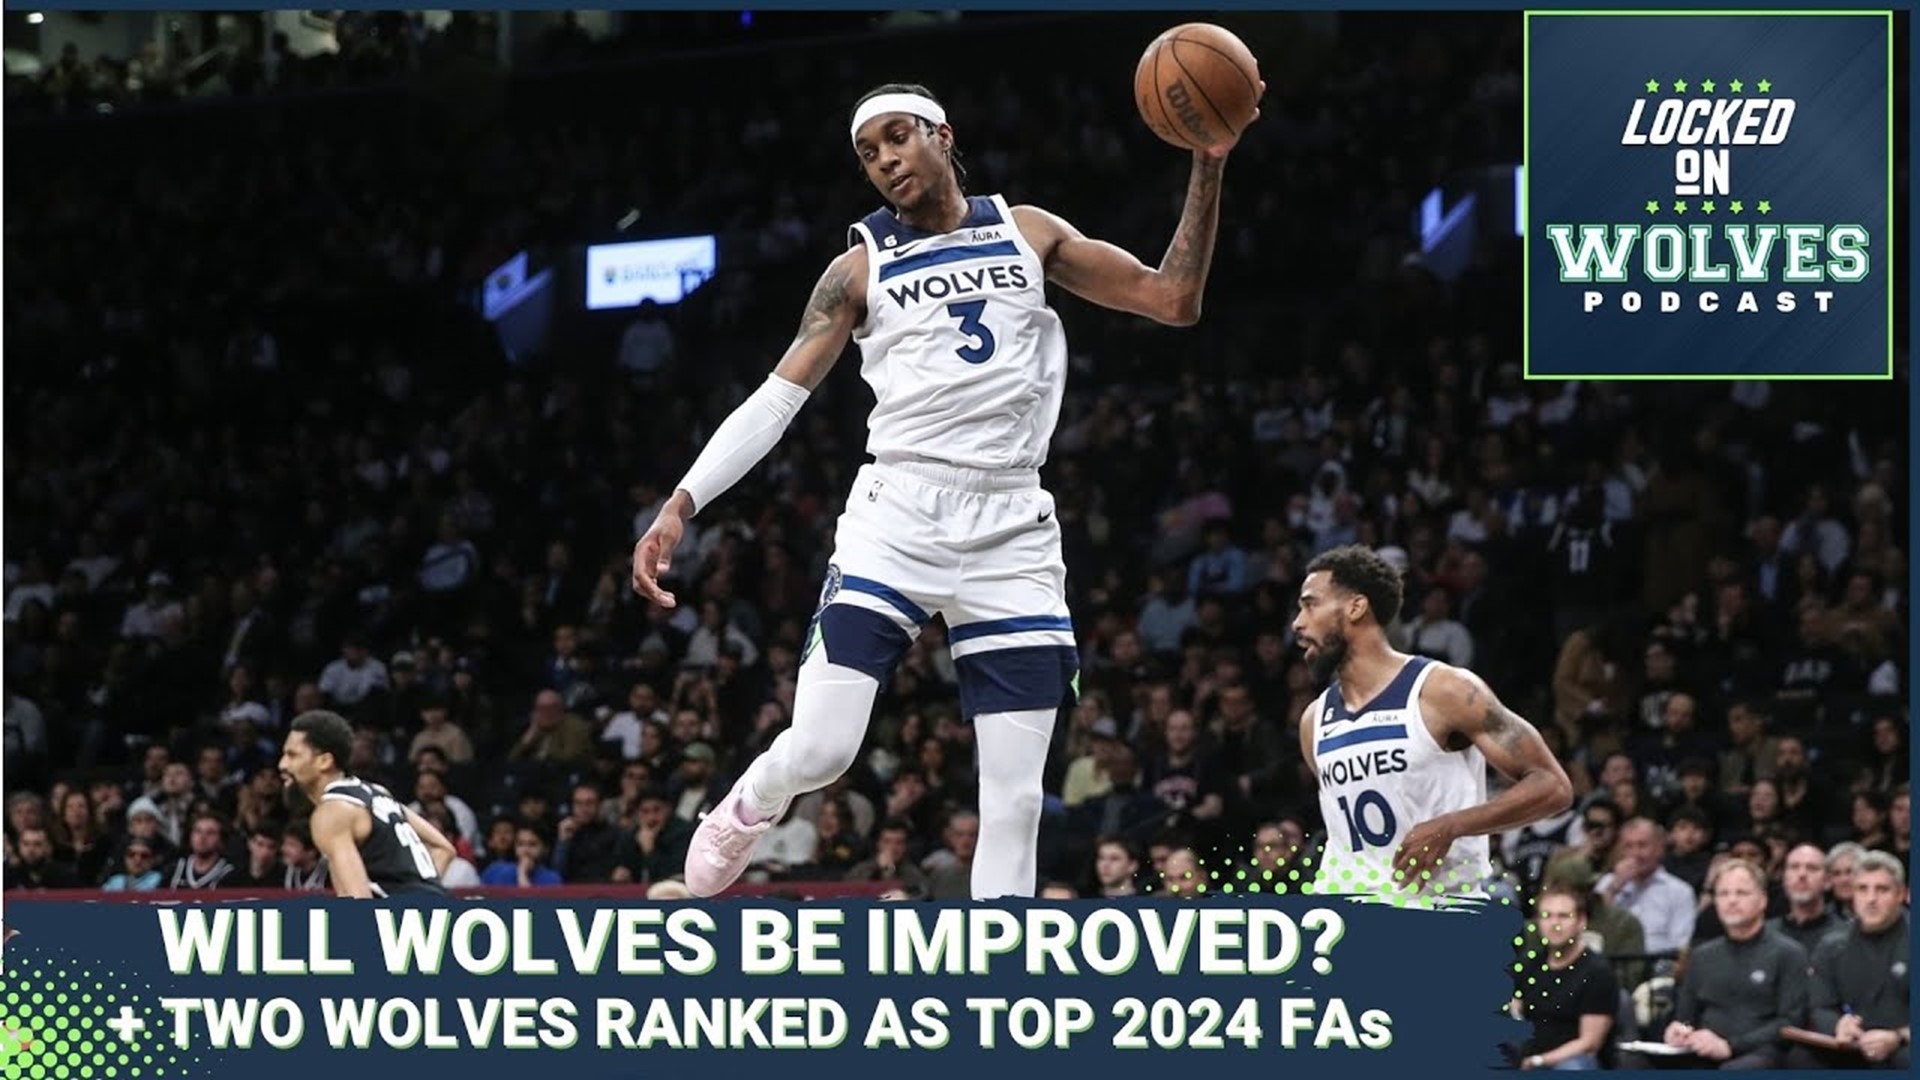 Newly-acquired Alexander-Walker gives Timberwolves a needed